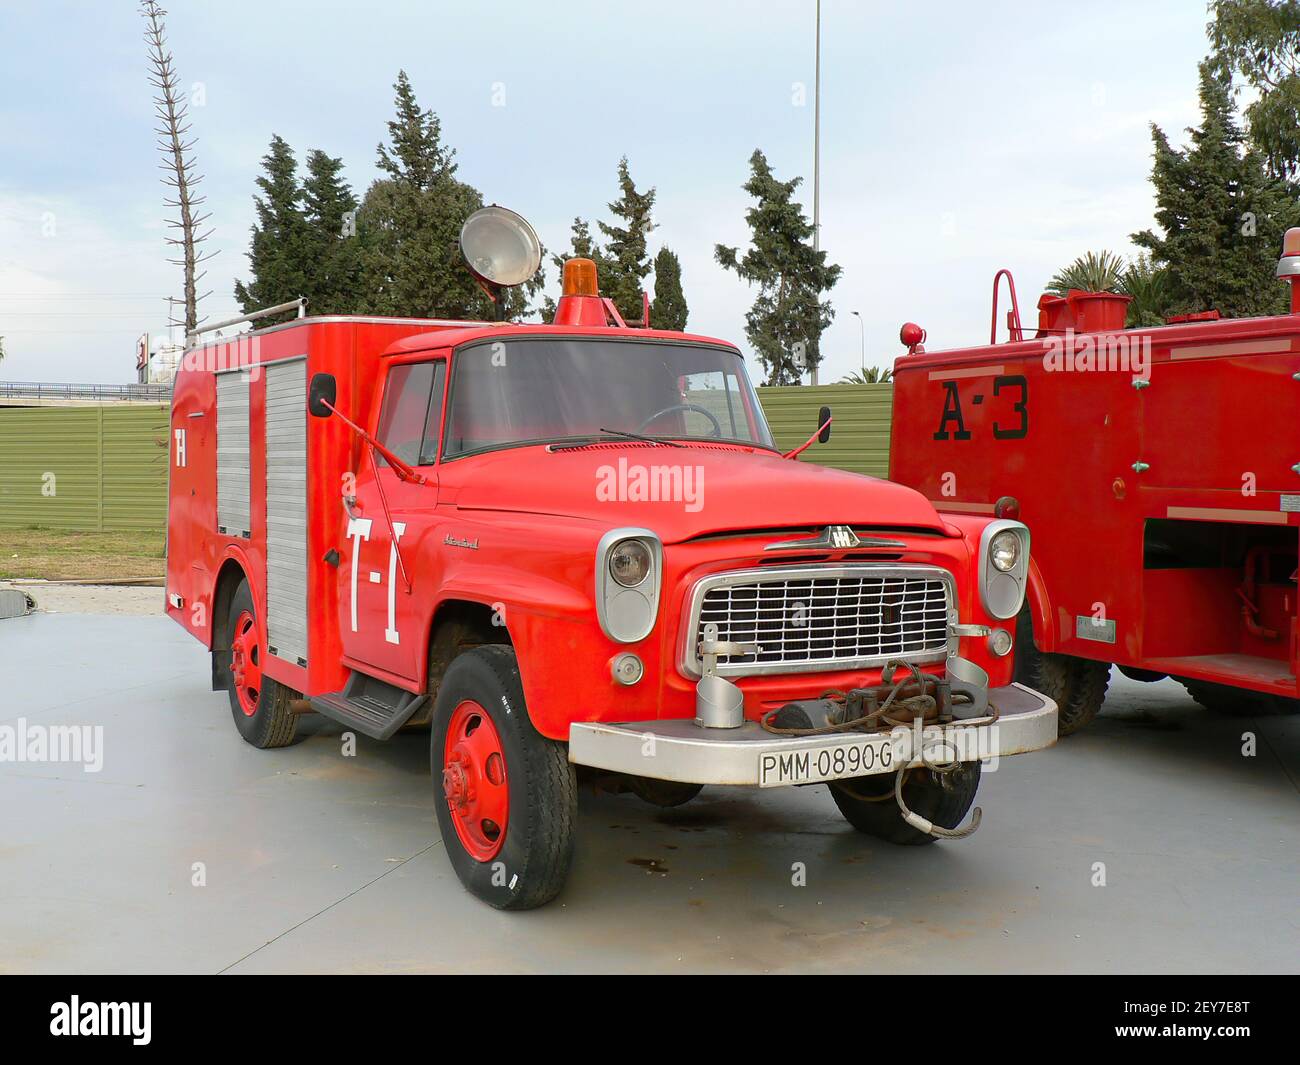 Old International fire engine at Malaga aviation museum, Spain. Stock Photo